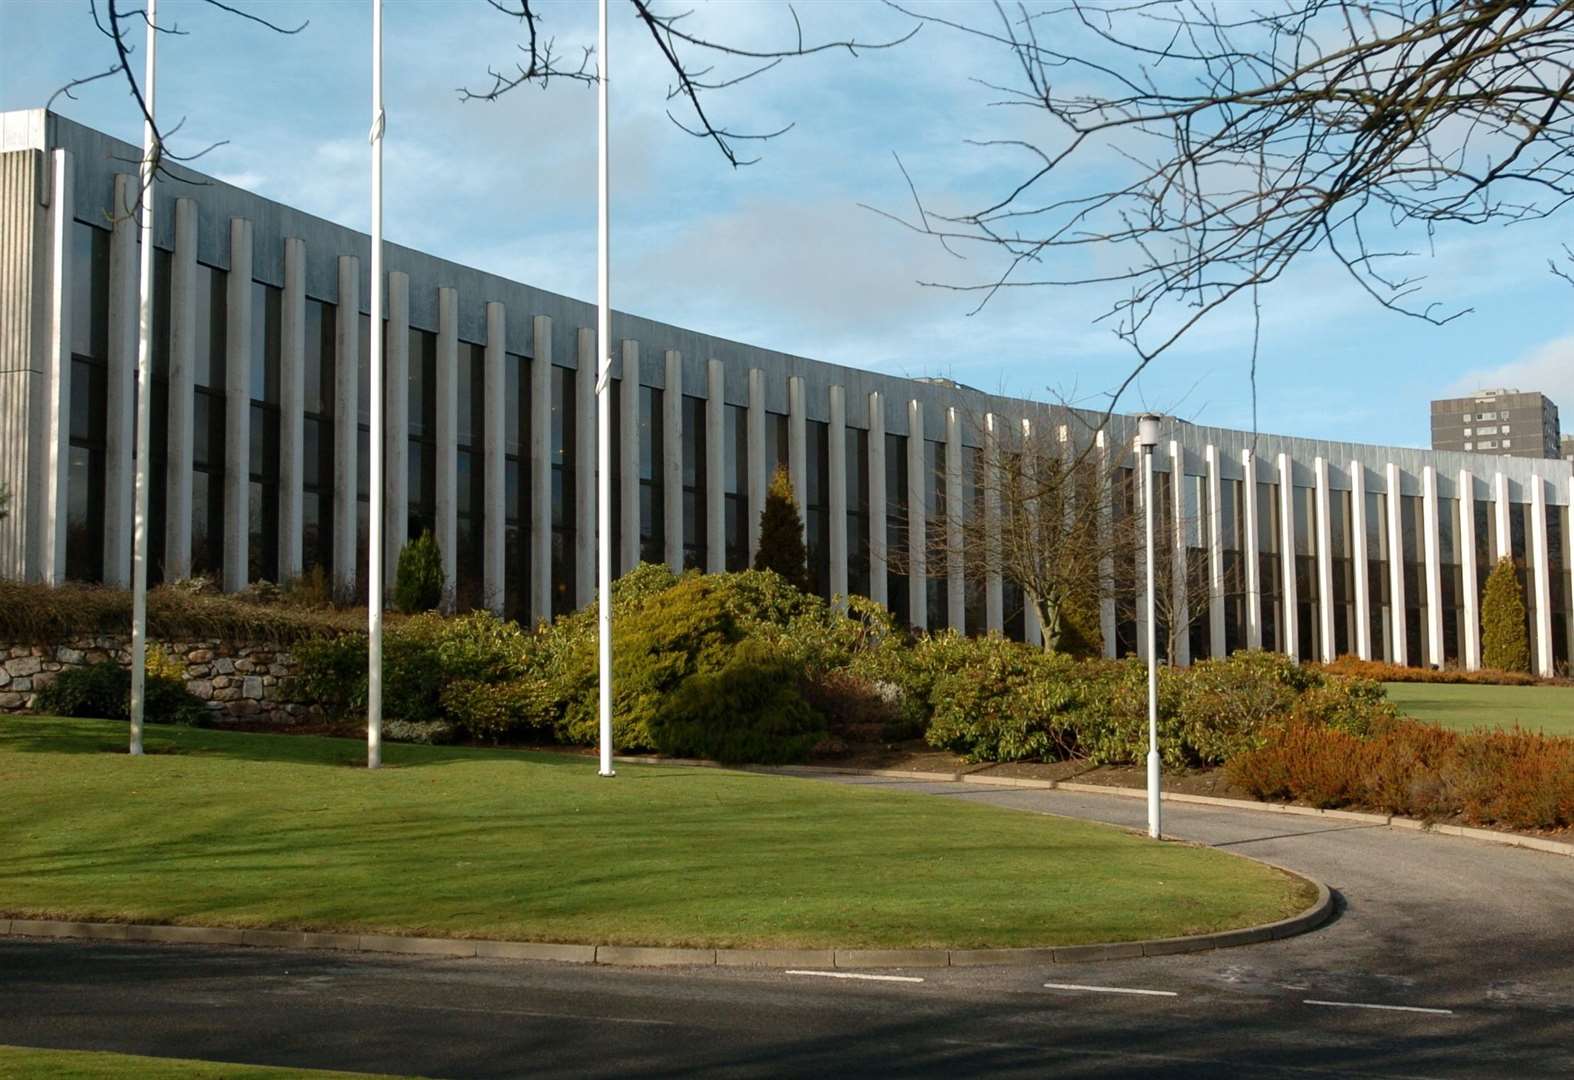 A petition signed by 600 local supporters was presented to Aberdeenshire Council at Woodhill House ahead of an upcoming meeting of the Infrastructure Services Committee.